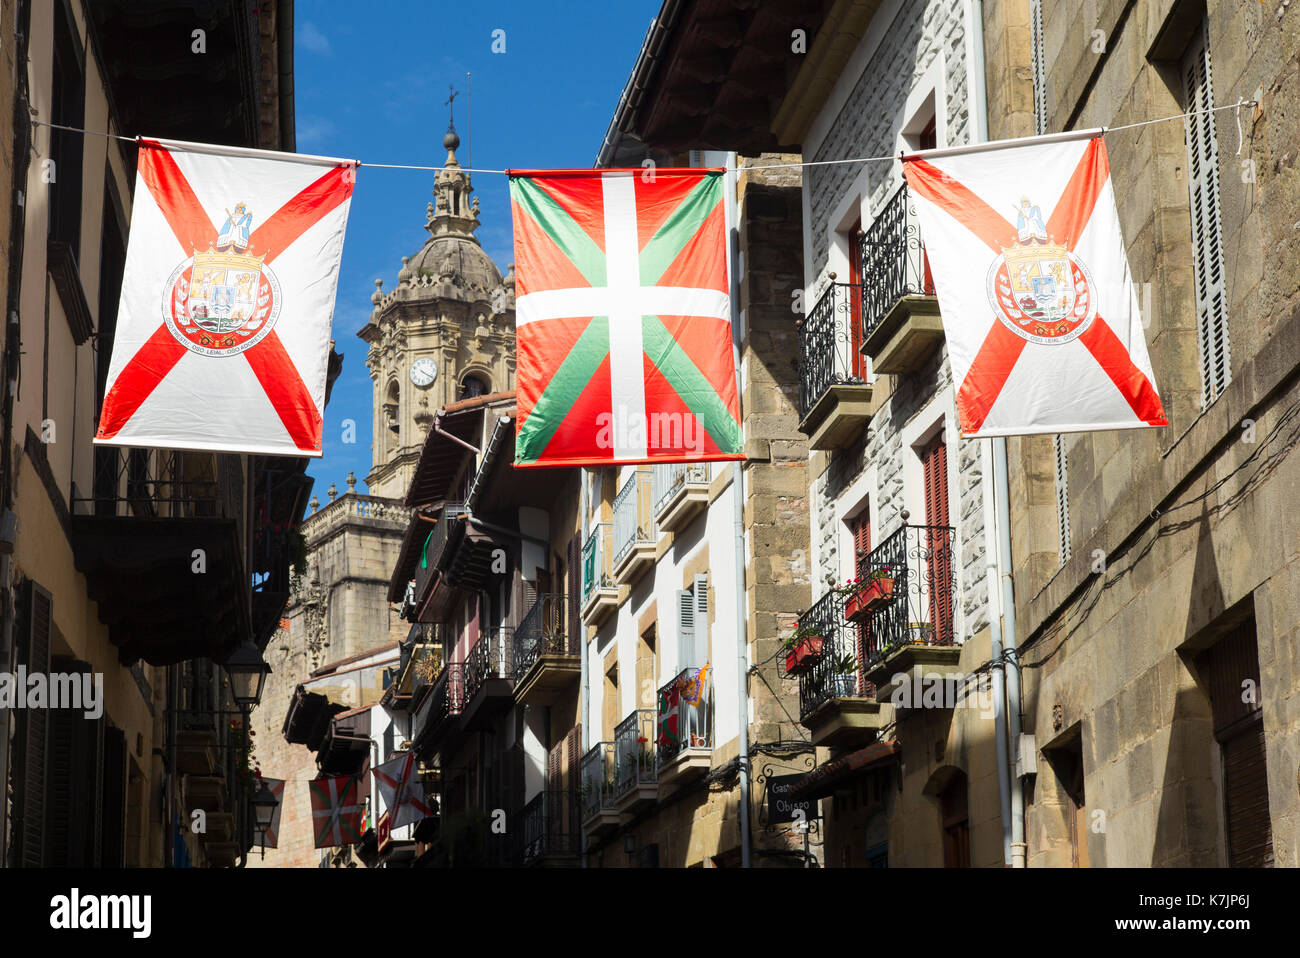 Basque Flag and local flags of old town Hondarribia, in Basque Country, Spain Stock Photo